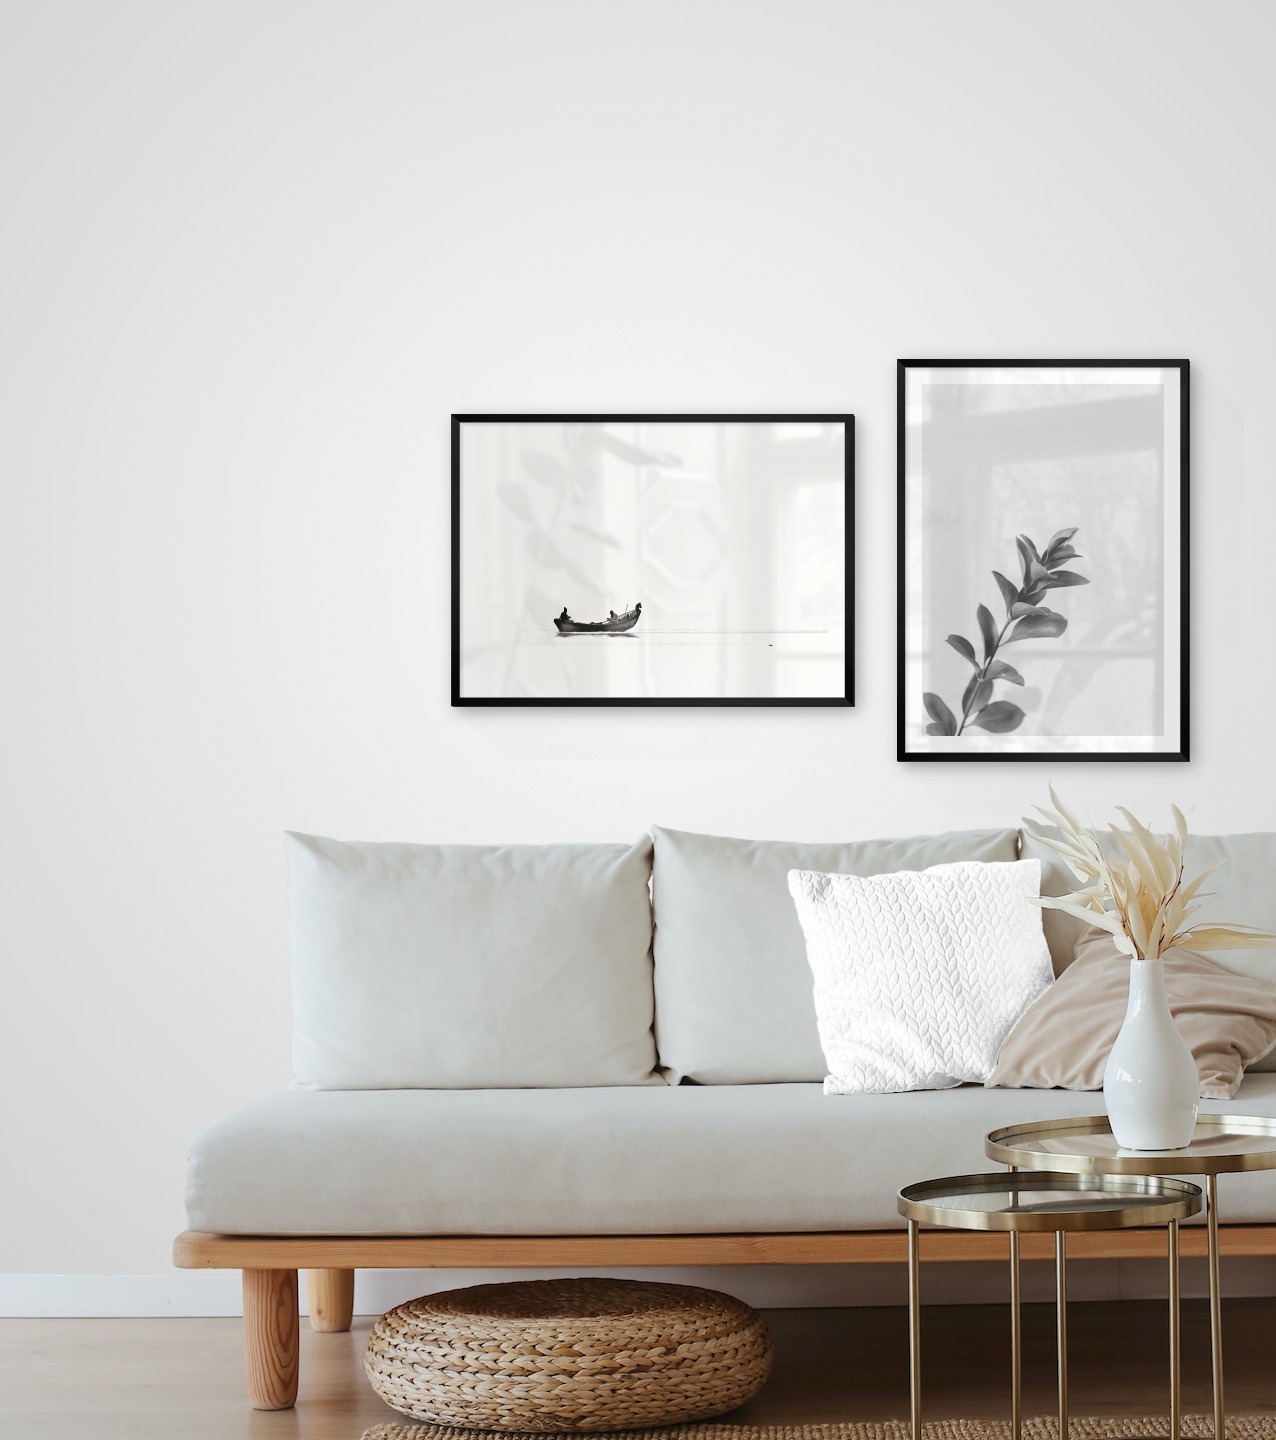 Gallery wall with picture frames in black in sizes 50x70 with prints "People in boat" and "Twig"